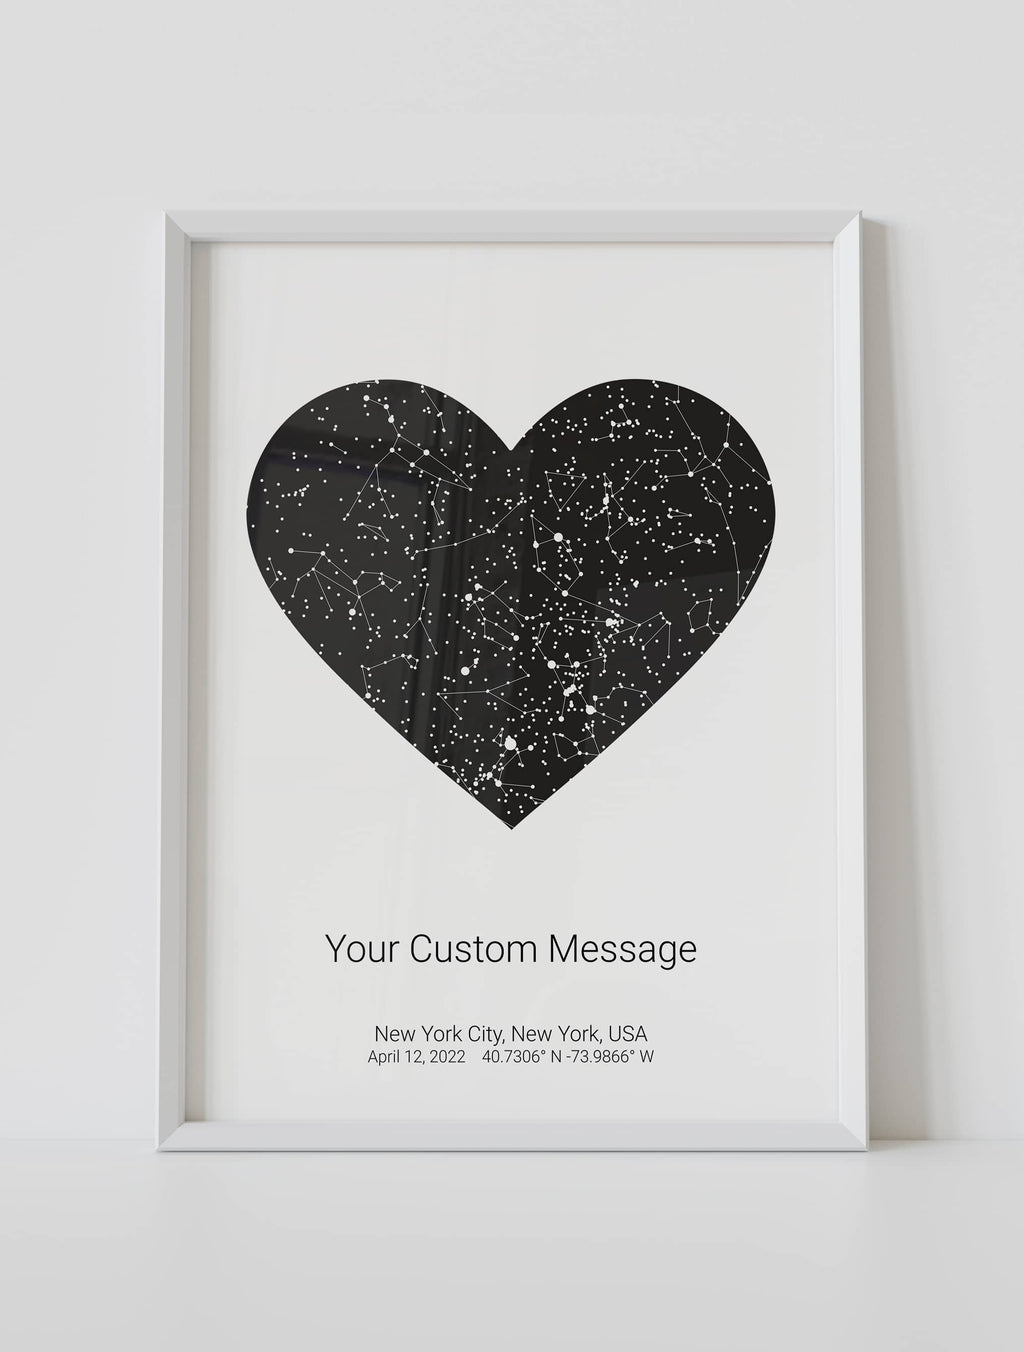 A framed heart star map poster featuring a specific date and location, with a personalized quote